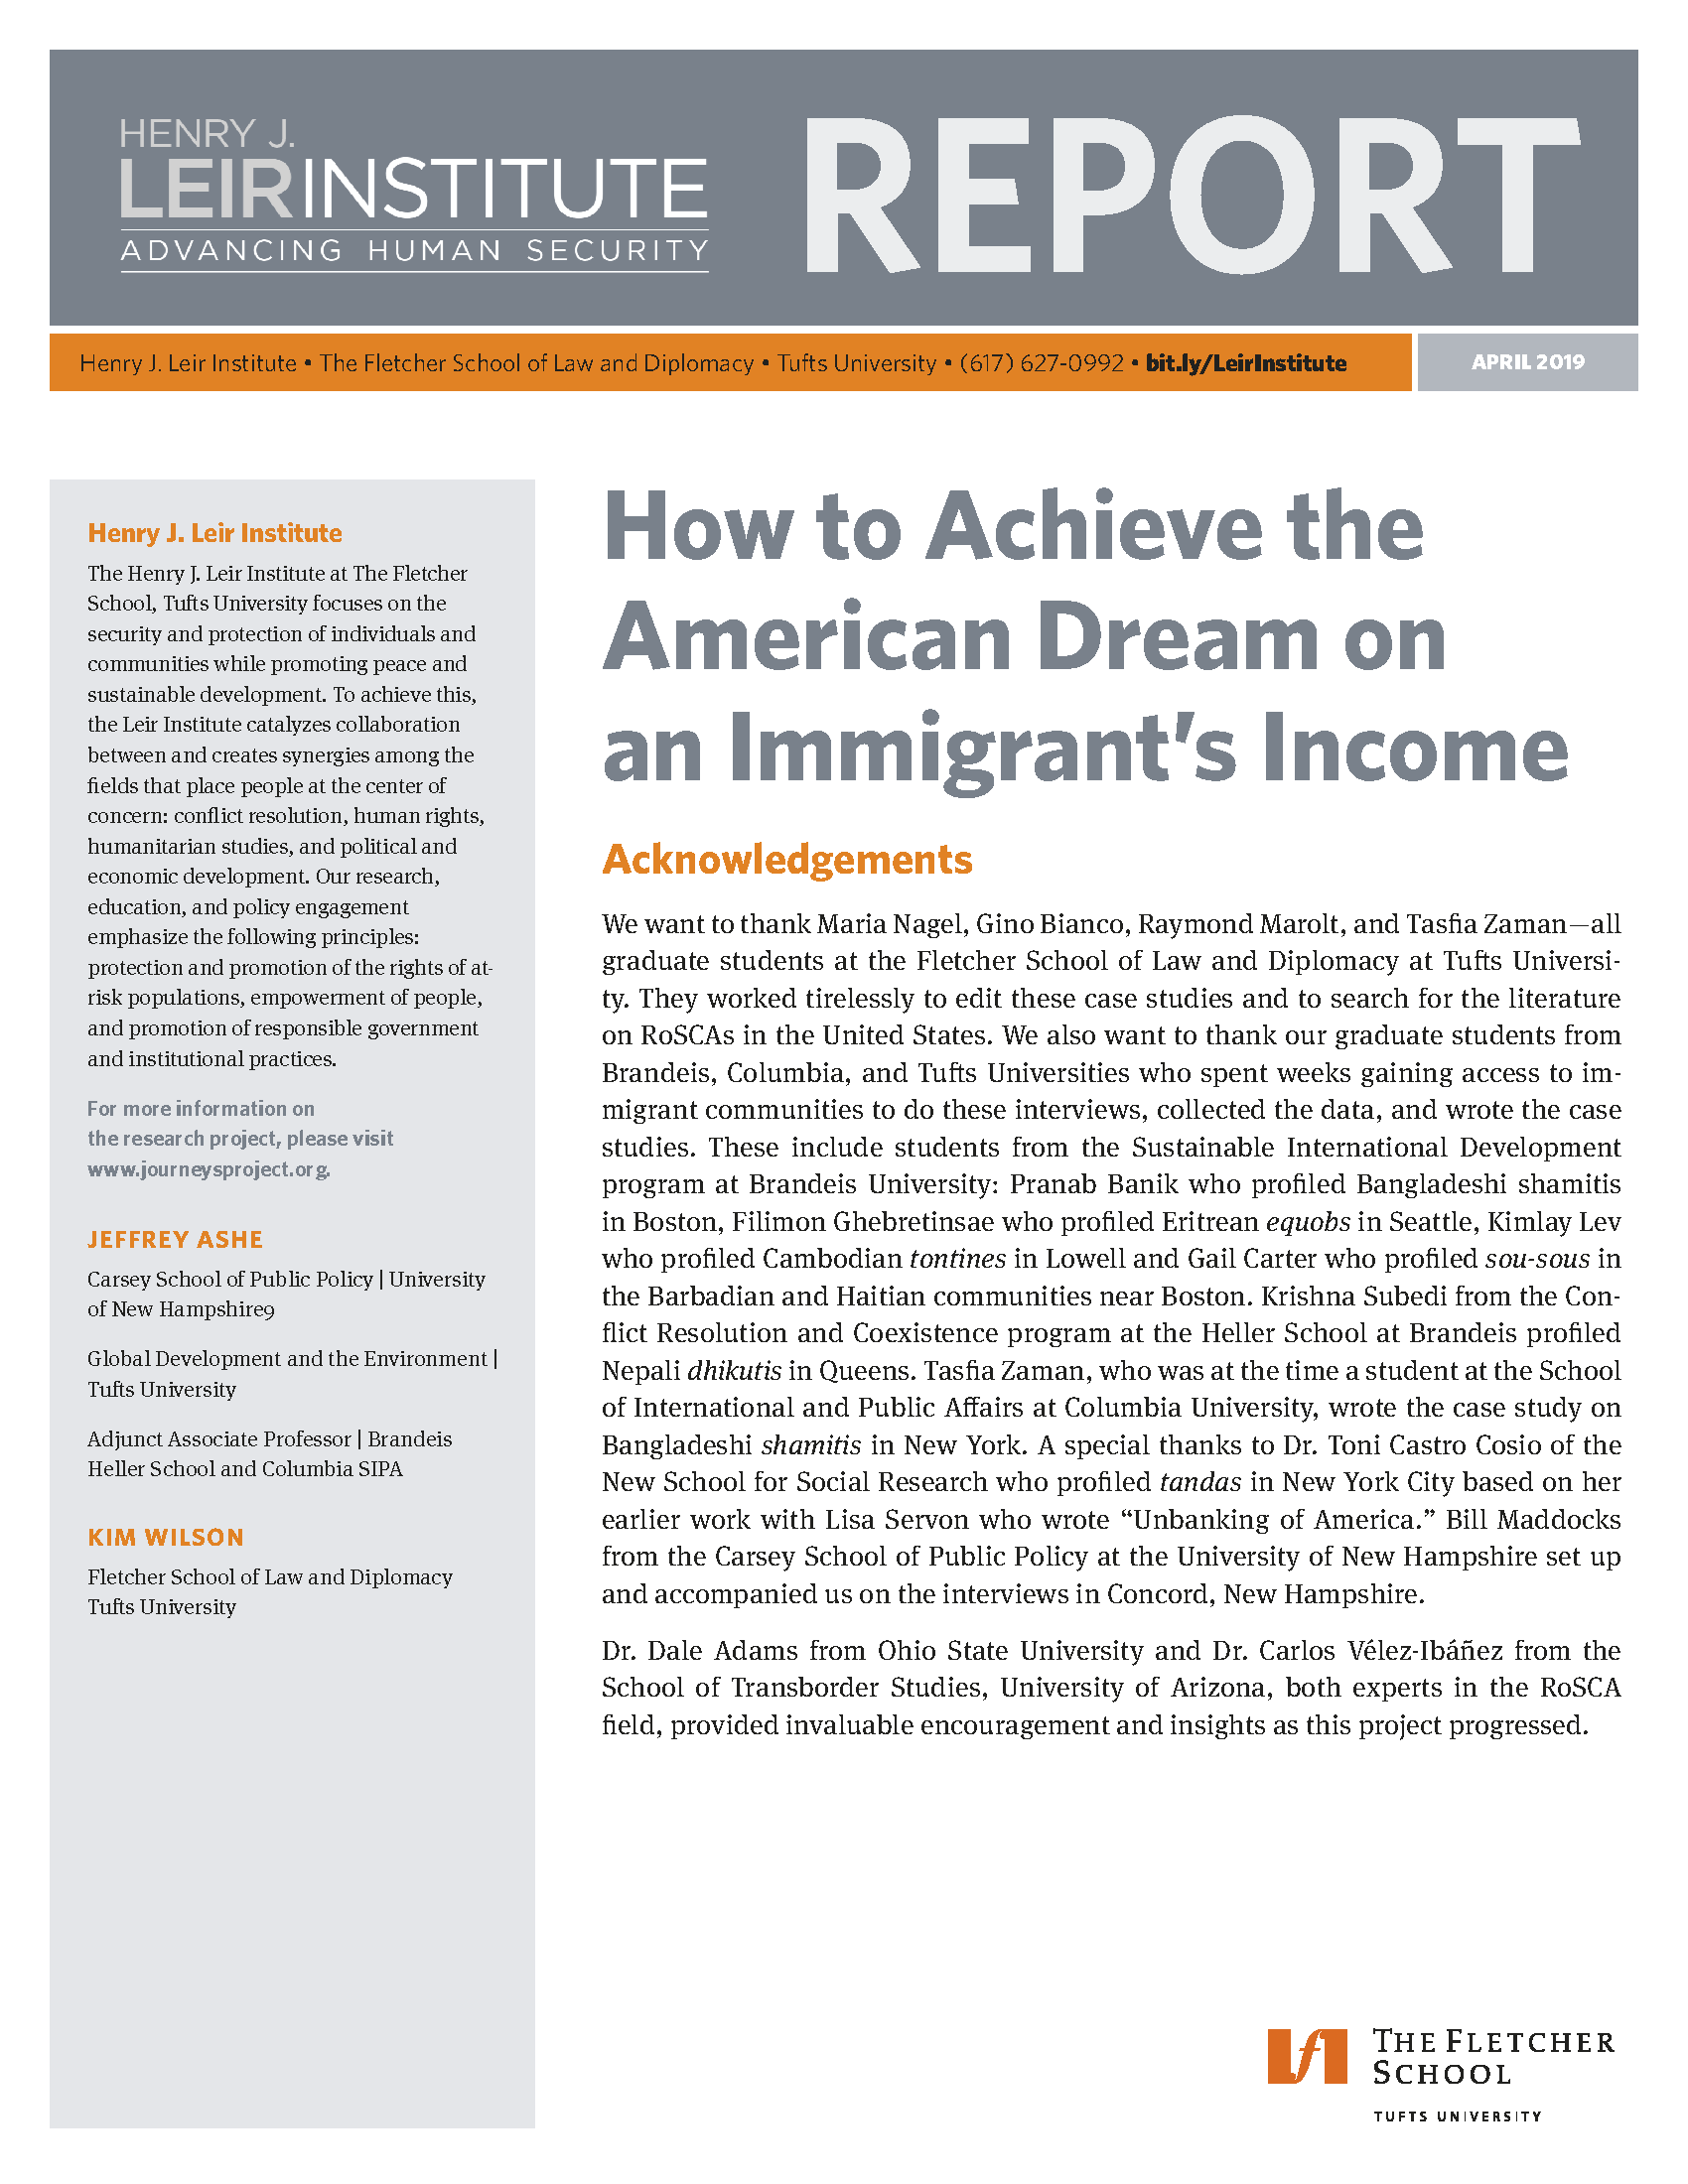 how immigration changed america essay